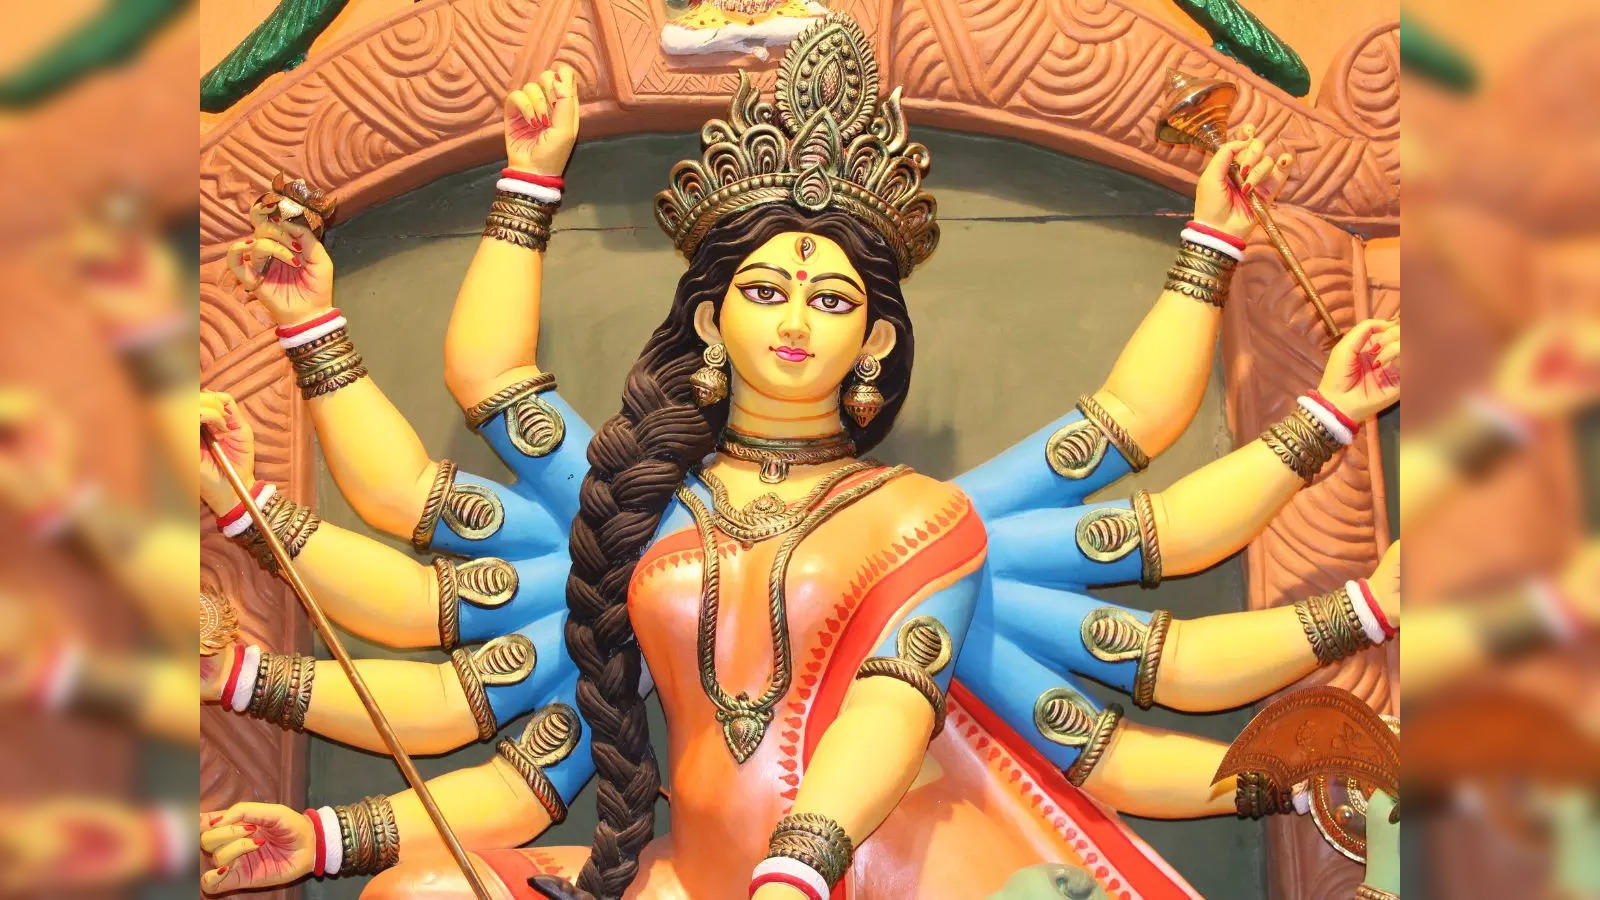 durga puja: For Bengalis, Mahalaya is not just the prelude to 10-day-long  festival but a day of Maa Durga's homecoming - The Economic Times